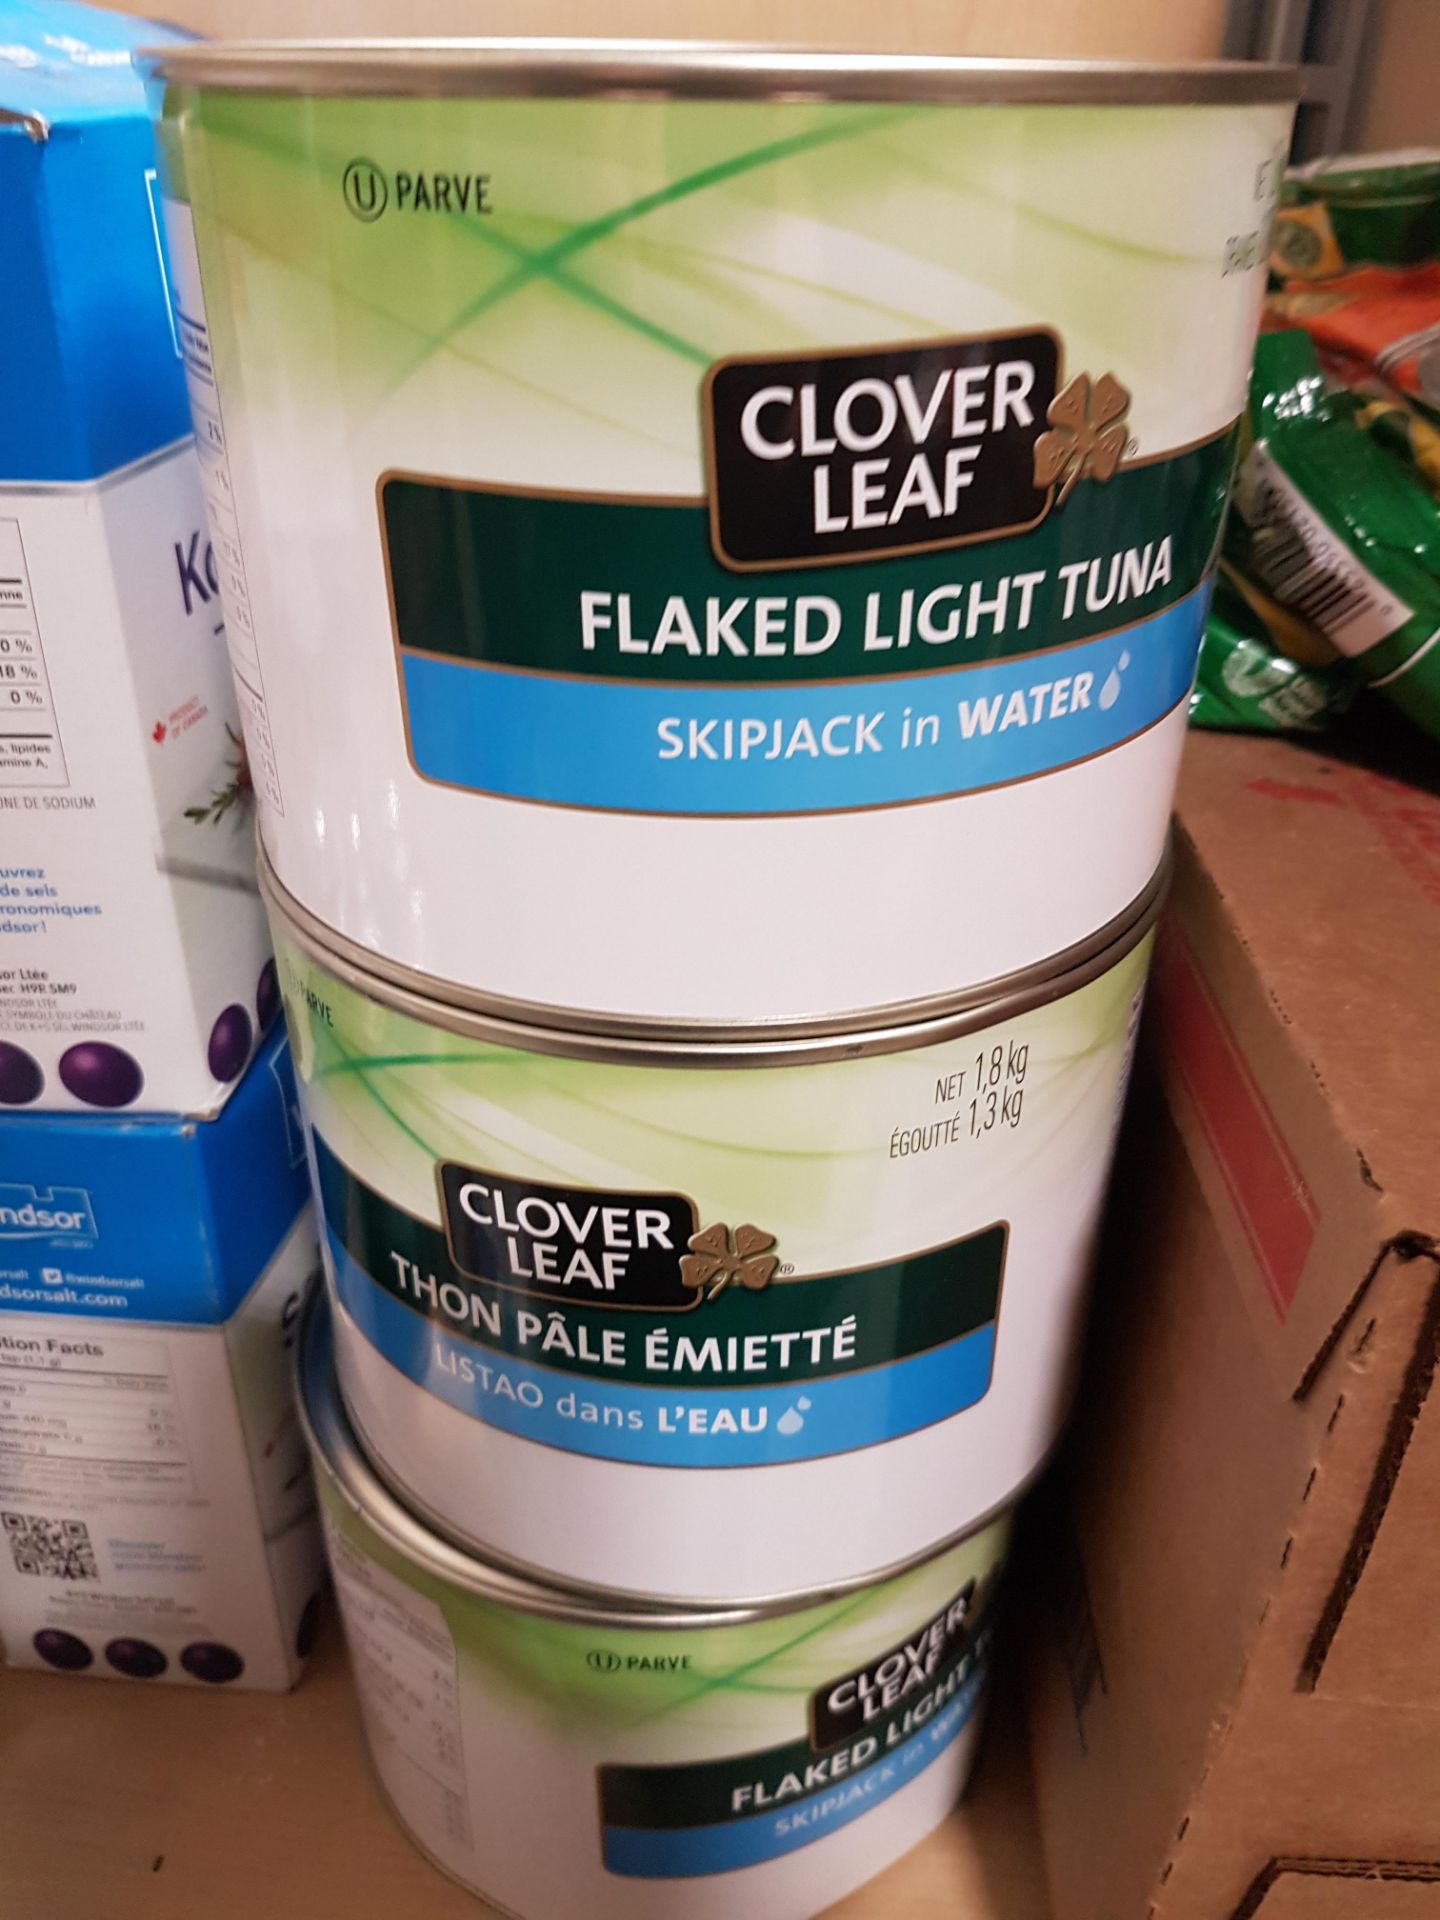 Clover Leaf Flaked Light Tuna - 6 x 1.8KG Cans - Dented